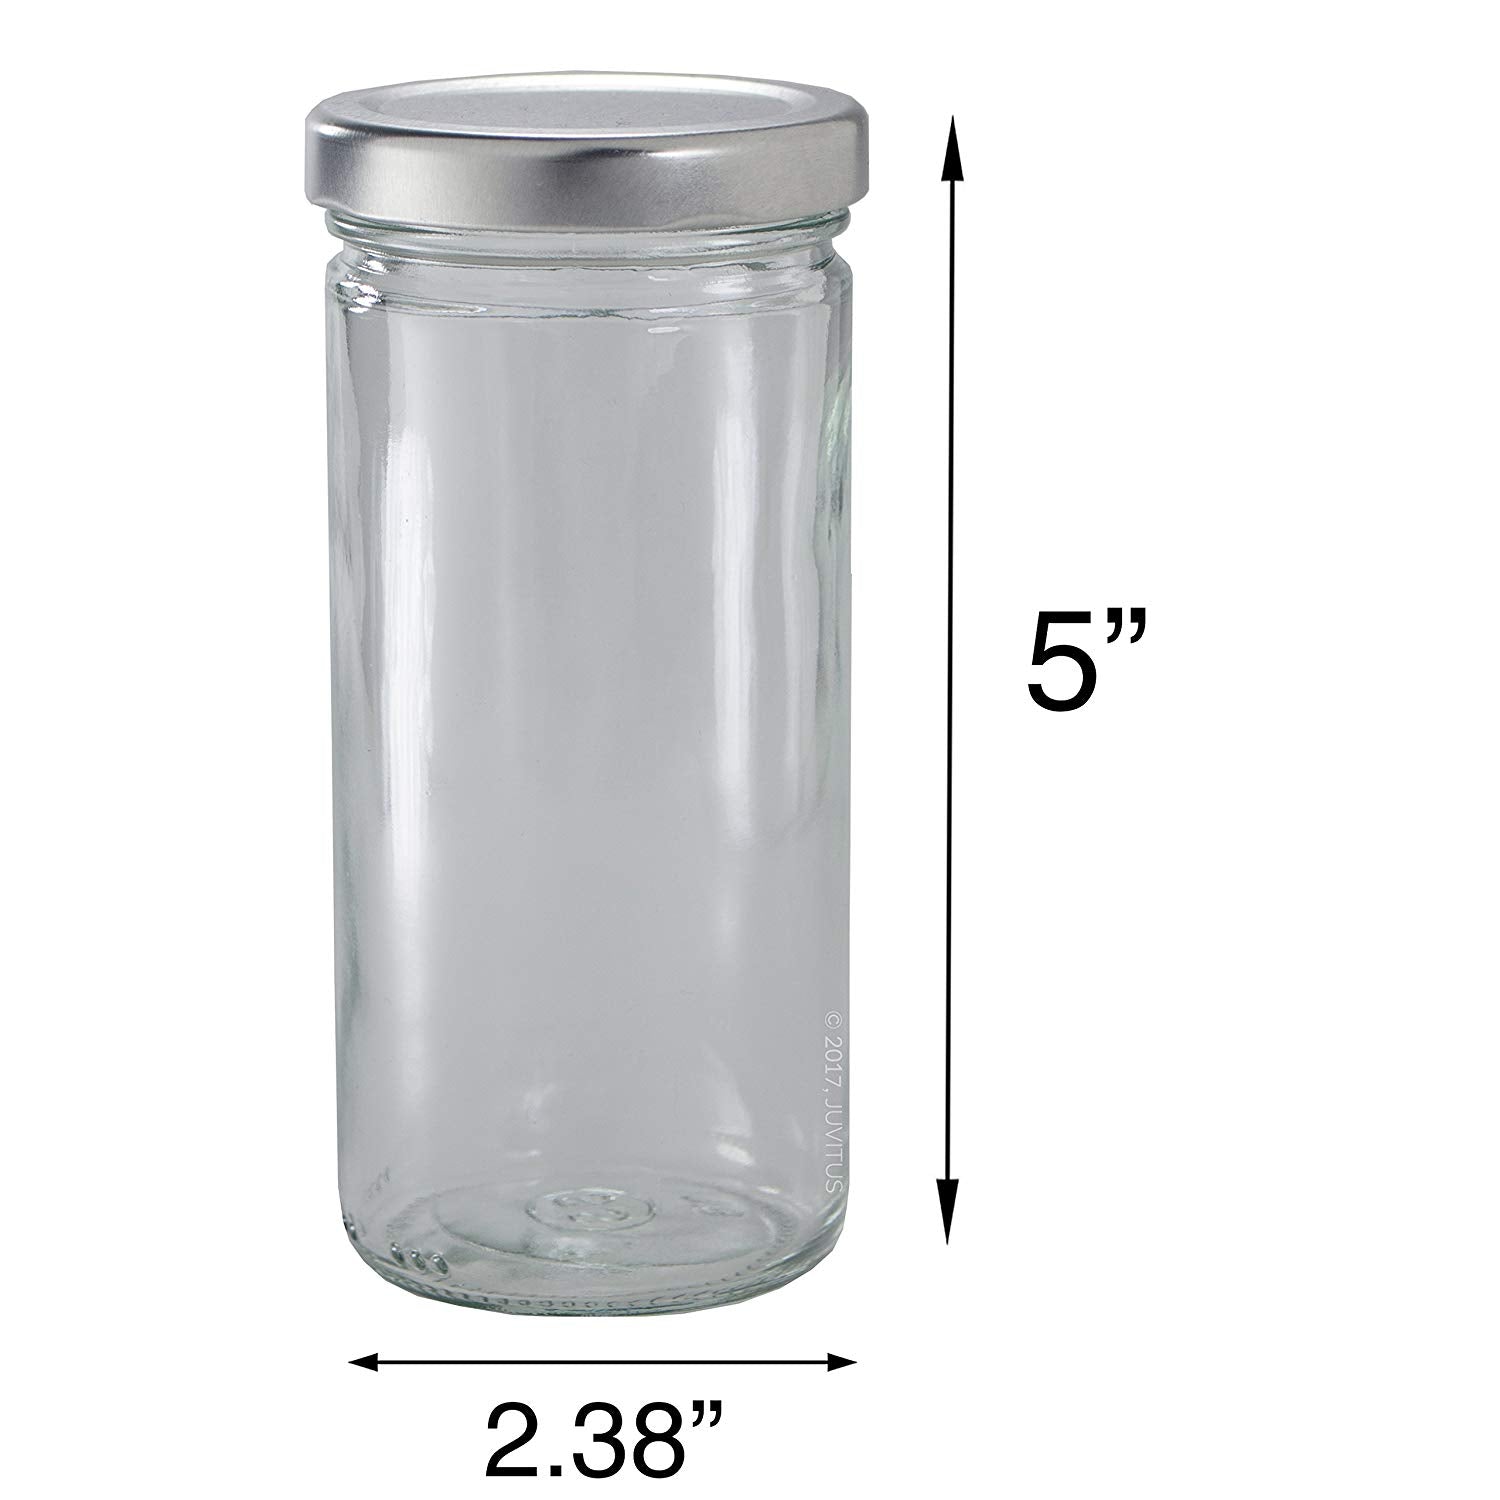 6 oz Clear Glass Paragon Jars (Bulk), Caps NOT Included